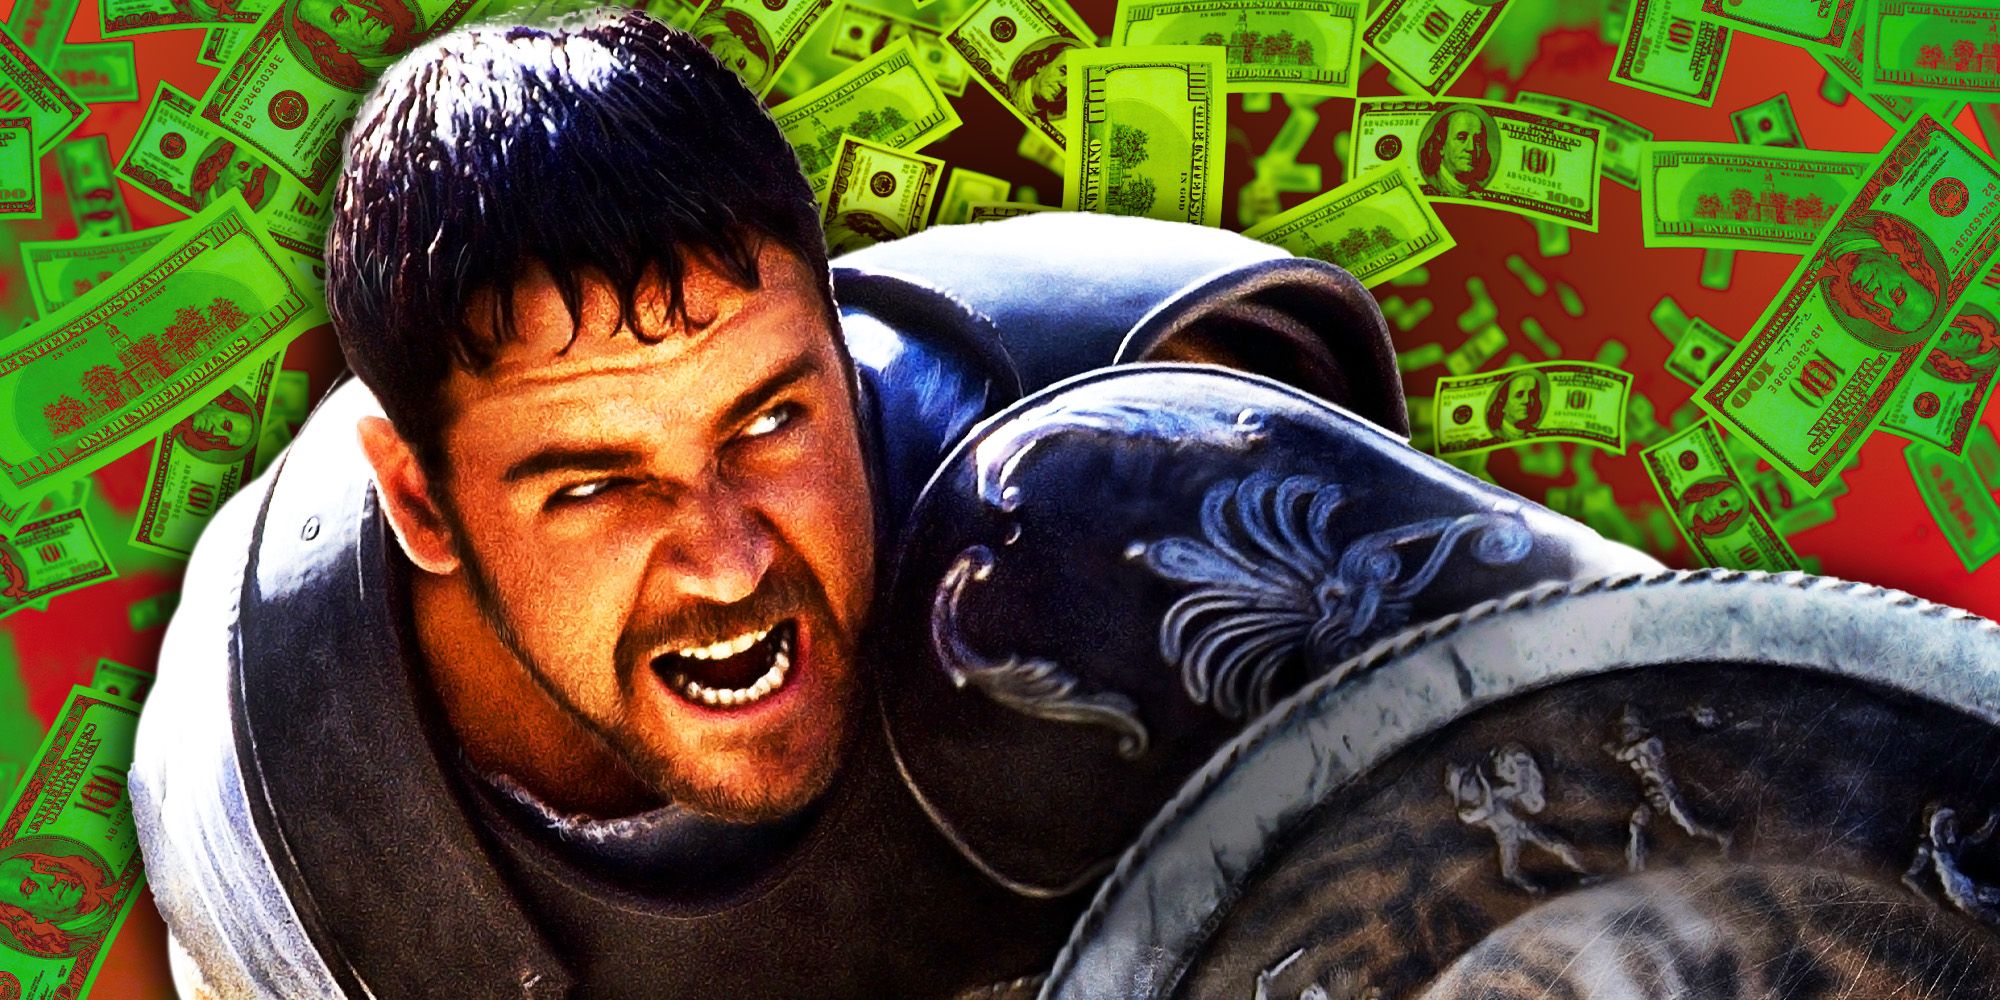 Russell Crowe in Gladiator against a backdrop of money